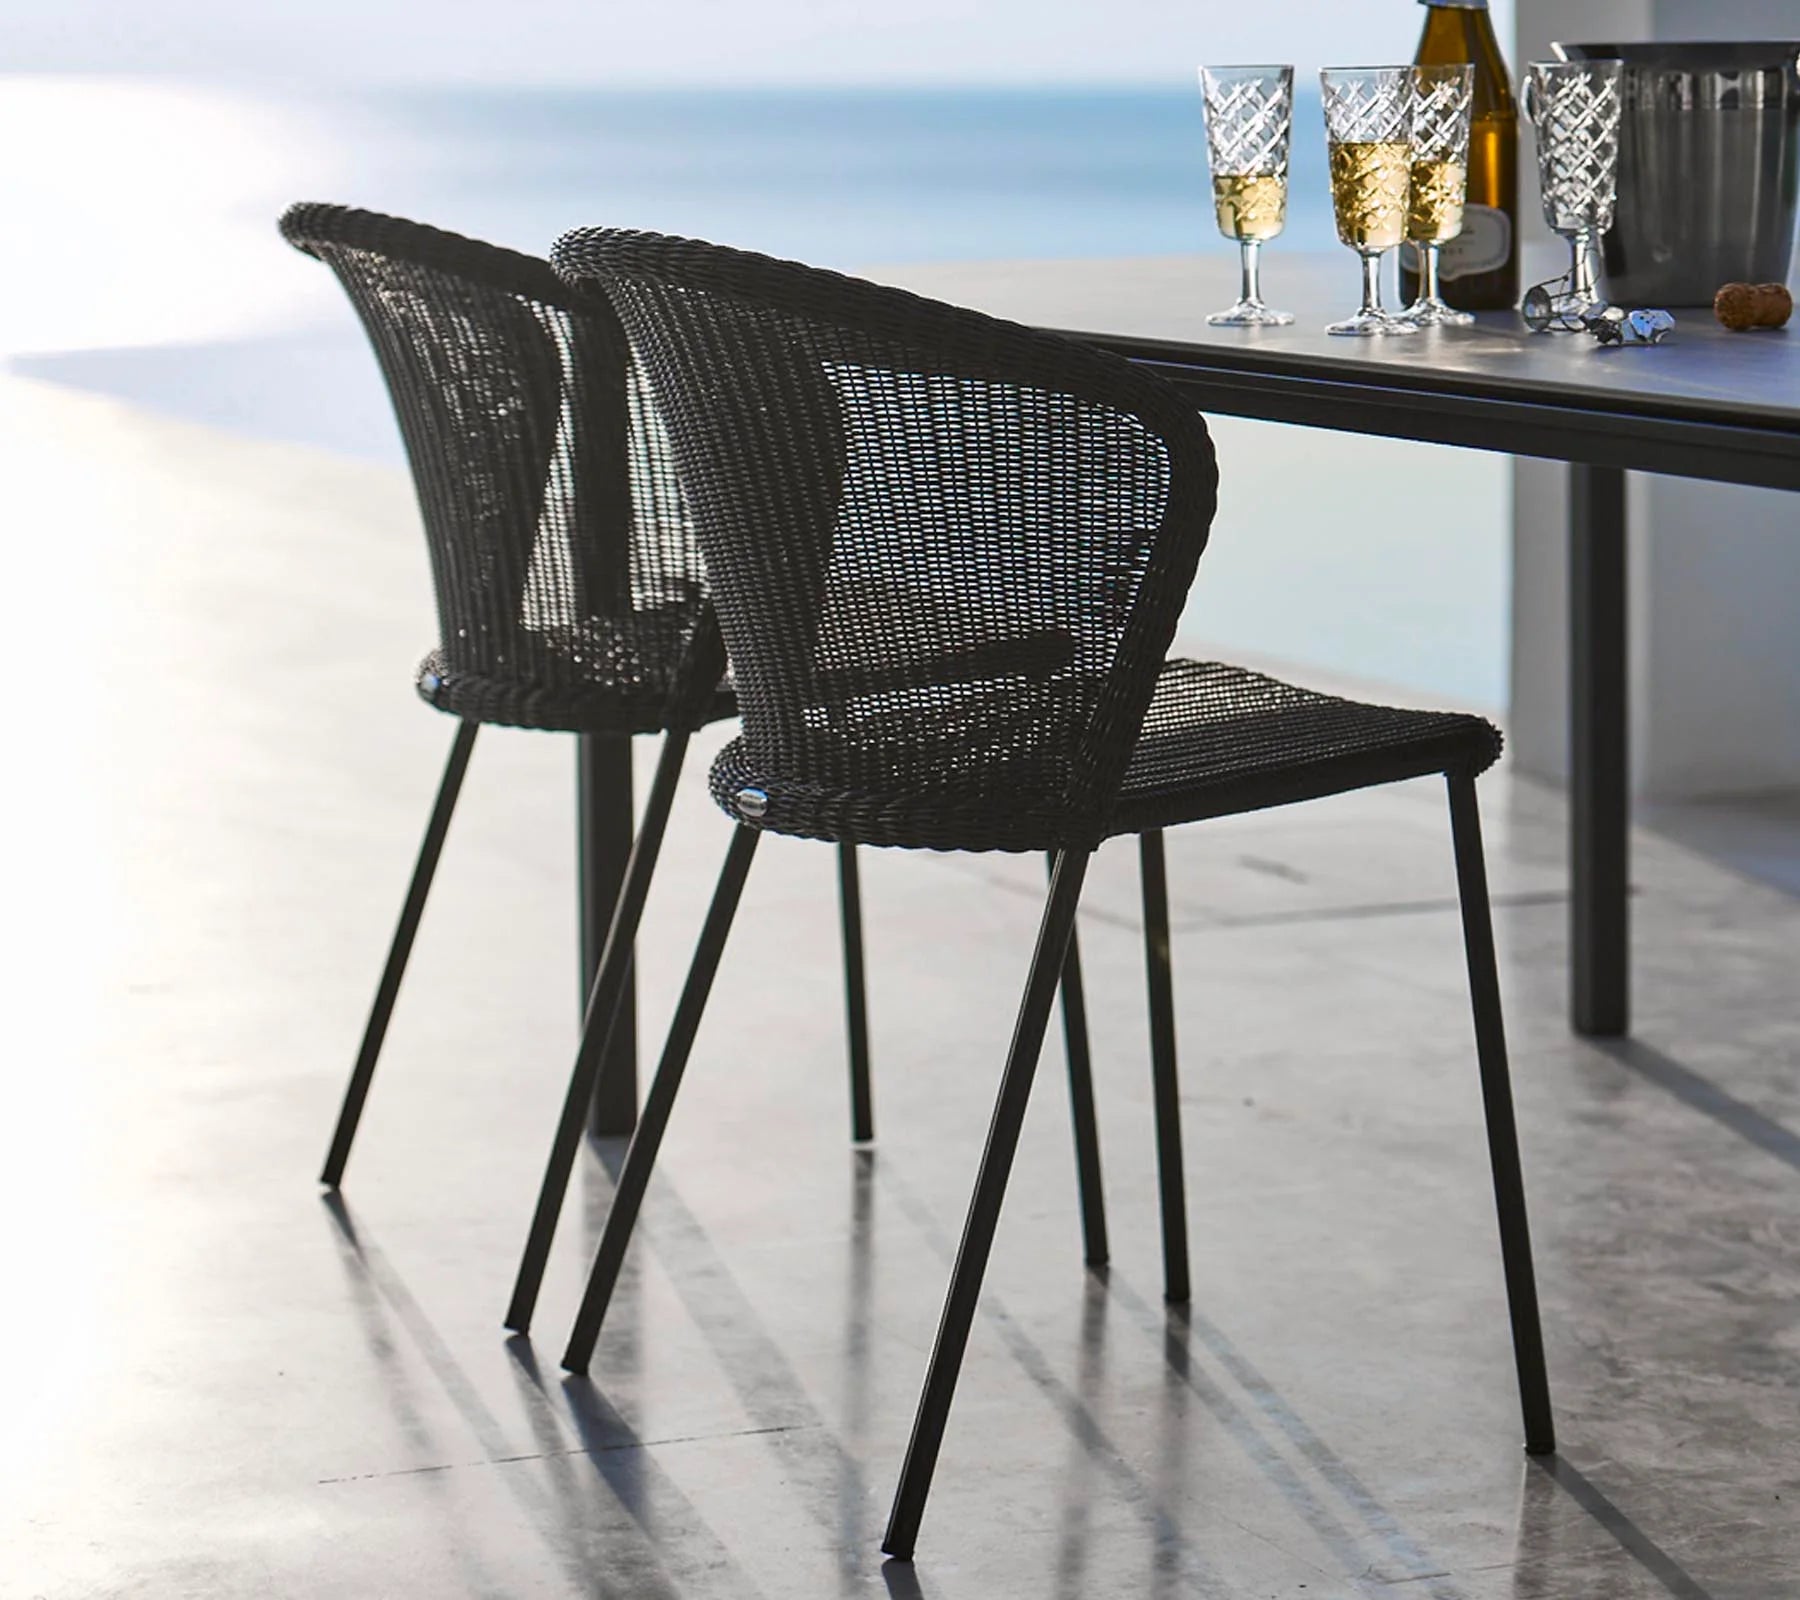 Boxhill's Lean Stackable Outdoor Garden Chair Black Weave lifestyle image with dining table with a bottle of wine, ice bucket and 4 glasses of wine on top